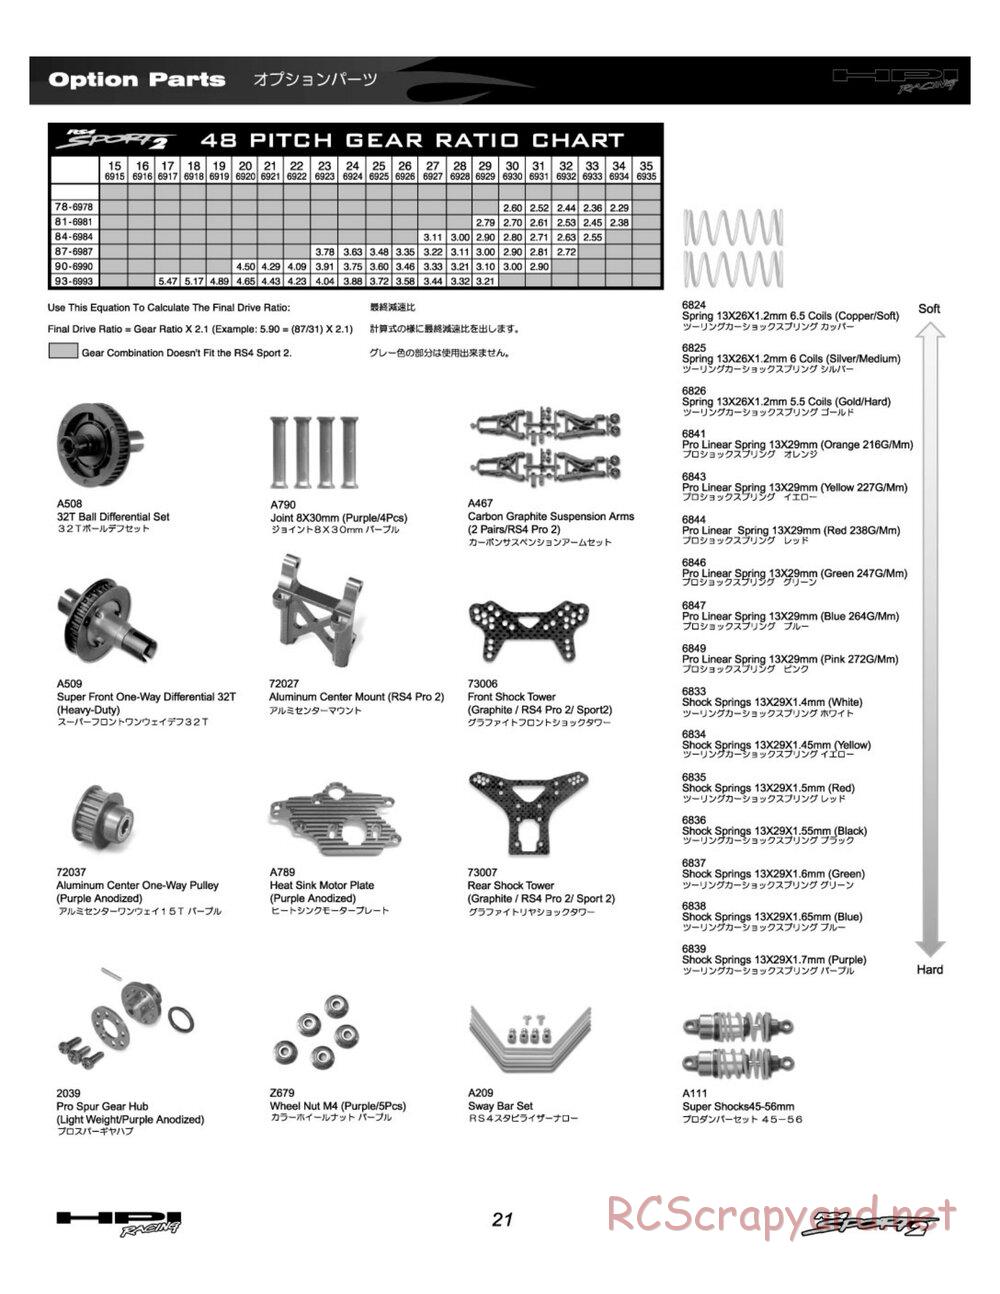 HPI - RS4 Sport 2 - Manual - Page 21